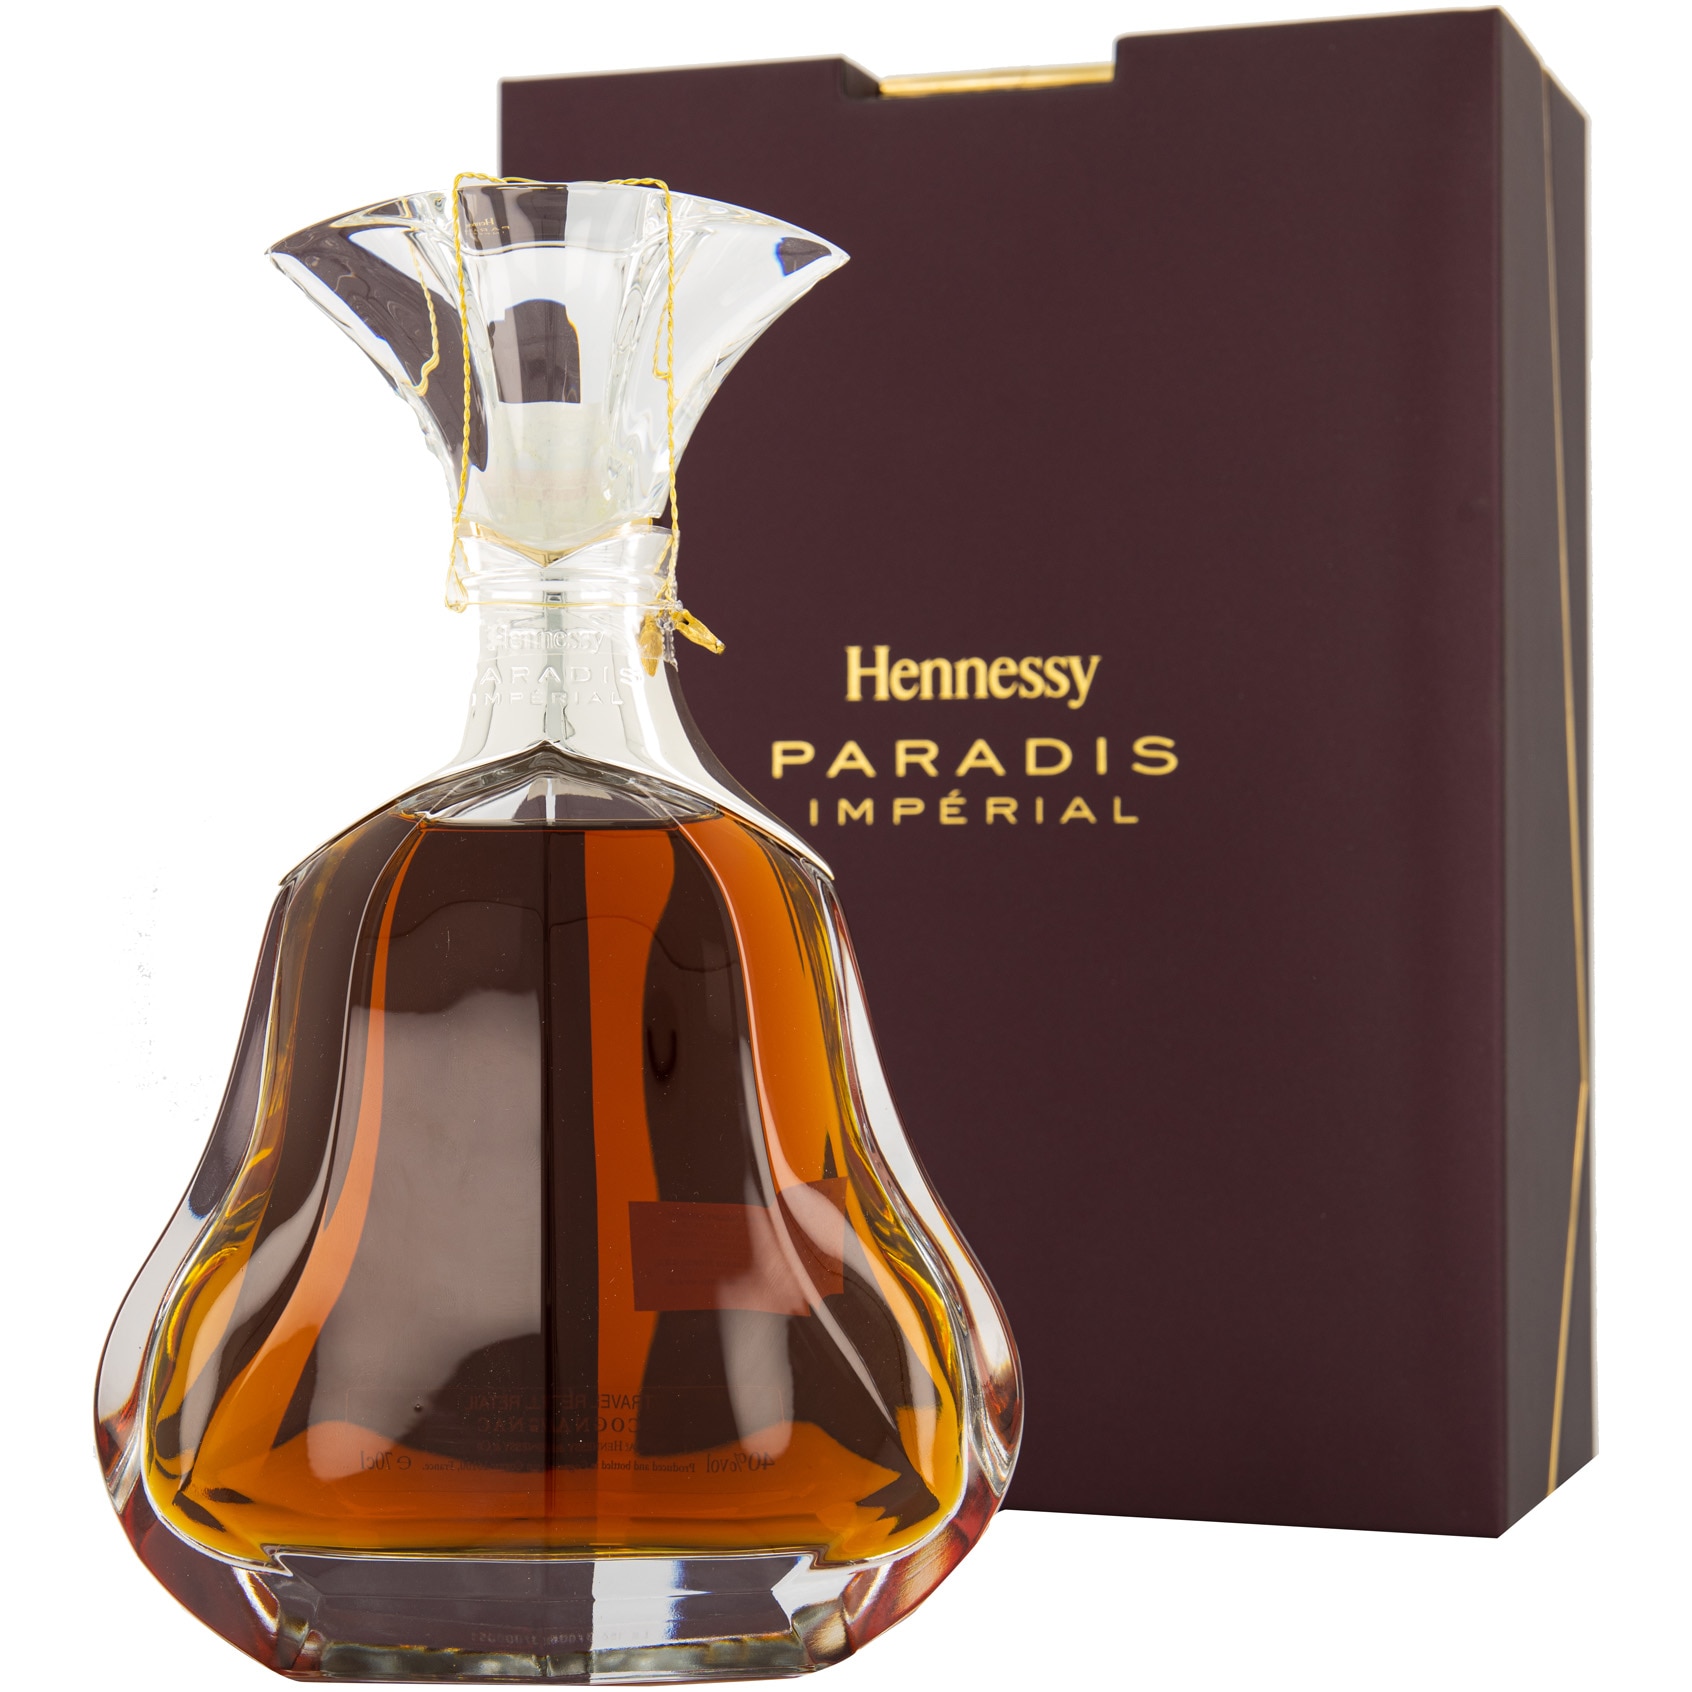 Coniac Hennessy Paradis Imperial, 40%, 0.7l 